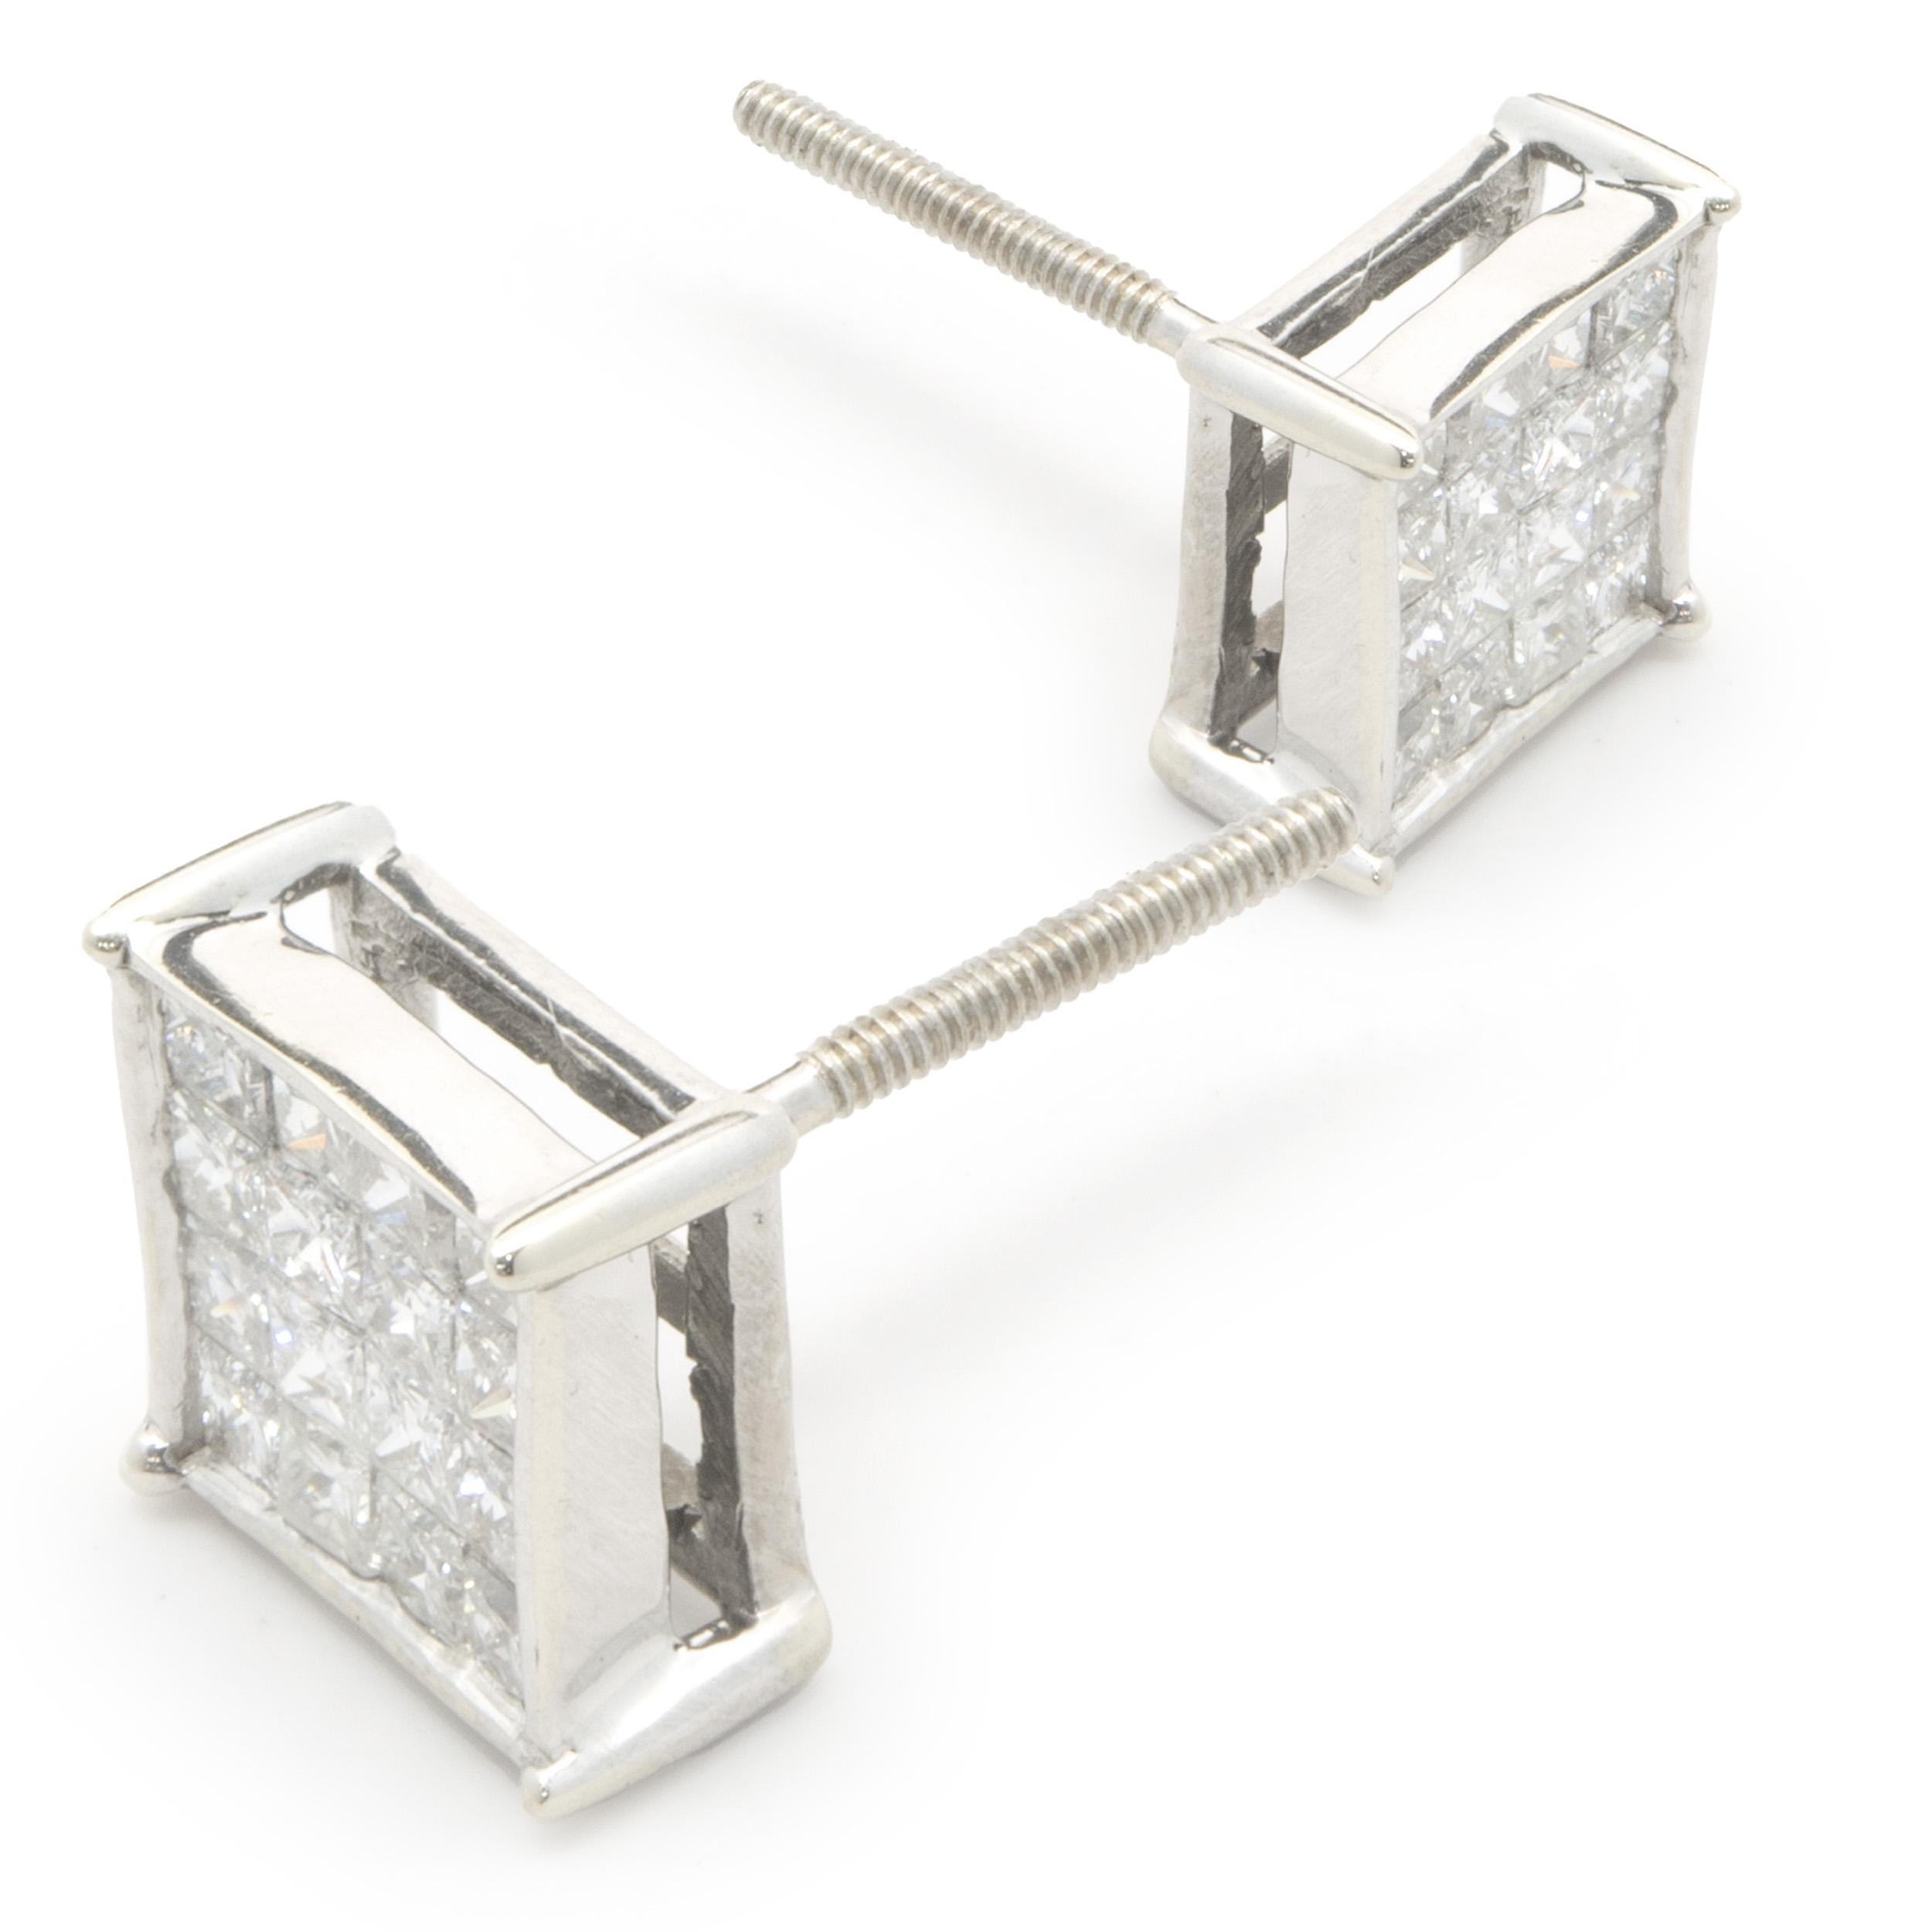 Material: 14k white gold
Diamonds: 32 princess cut = 1.00ct
Color: I
Clarity: SI2
Dimensions: earrings measure approximately 8 x 8mm in diameter
Fastenings: post with screw backs
Weight: 2.30 grams